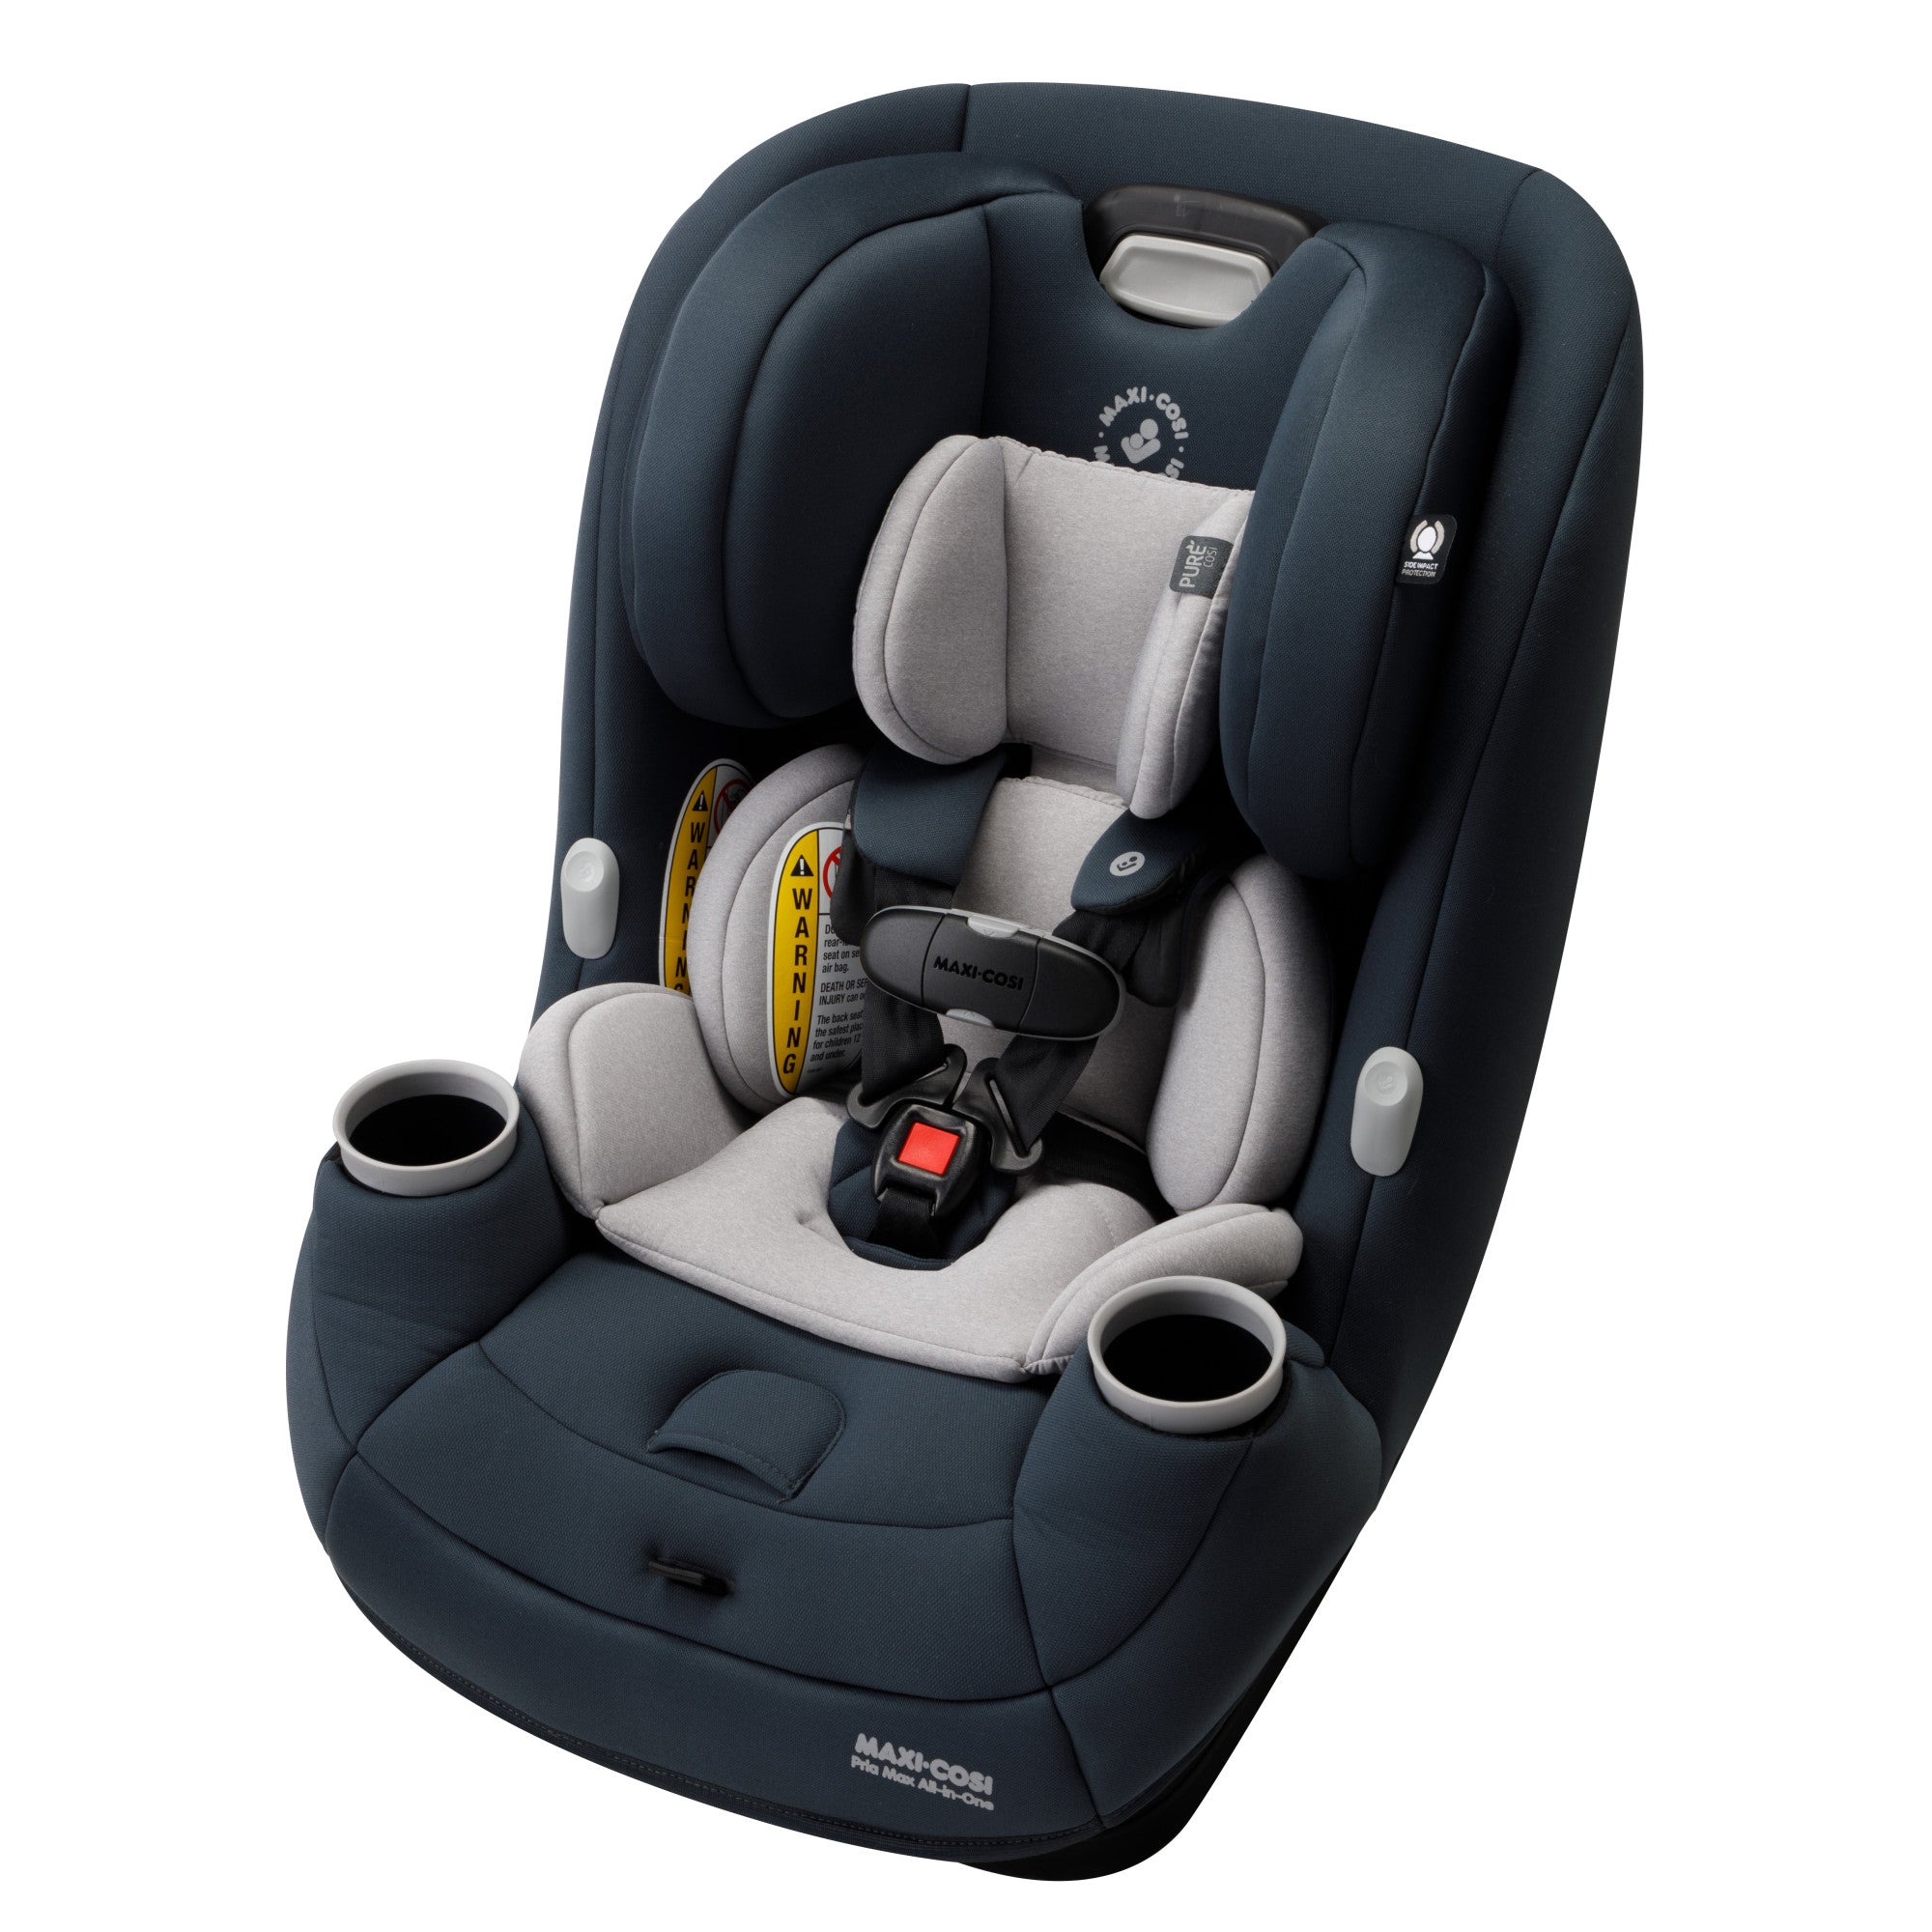 Pria™ Max All-in-One Convertible Car Seat - Essential Graphite - 45 degree angle view of left side